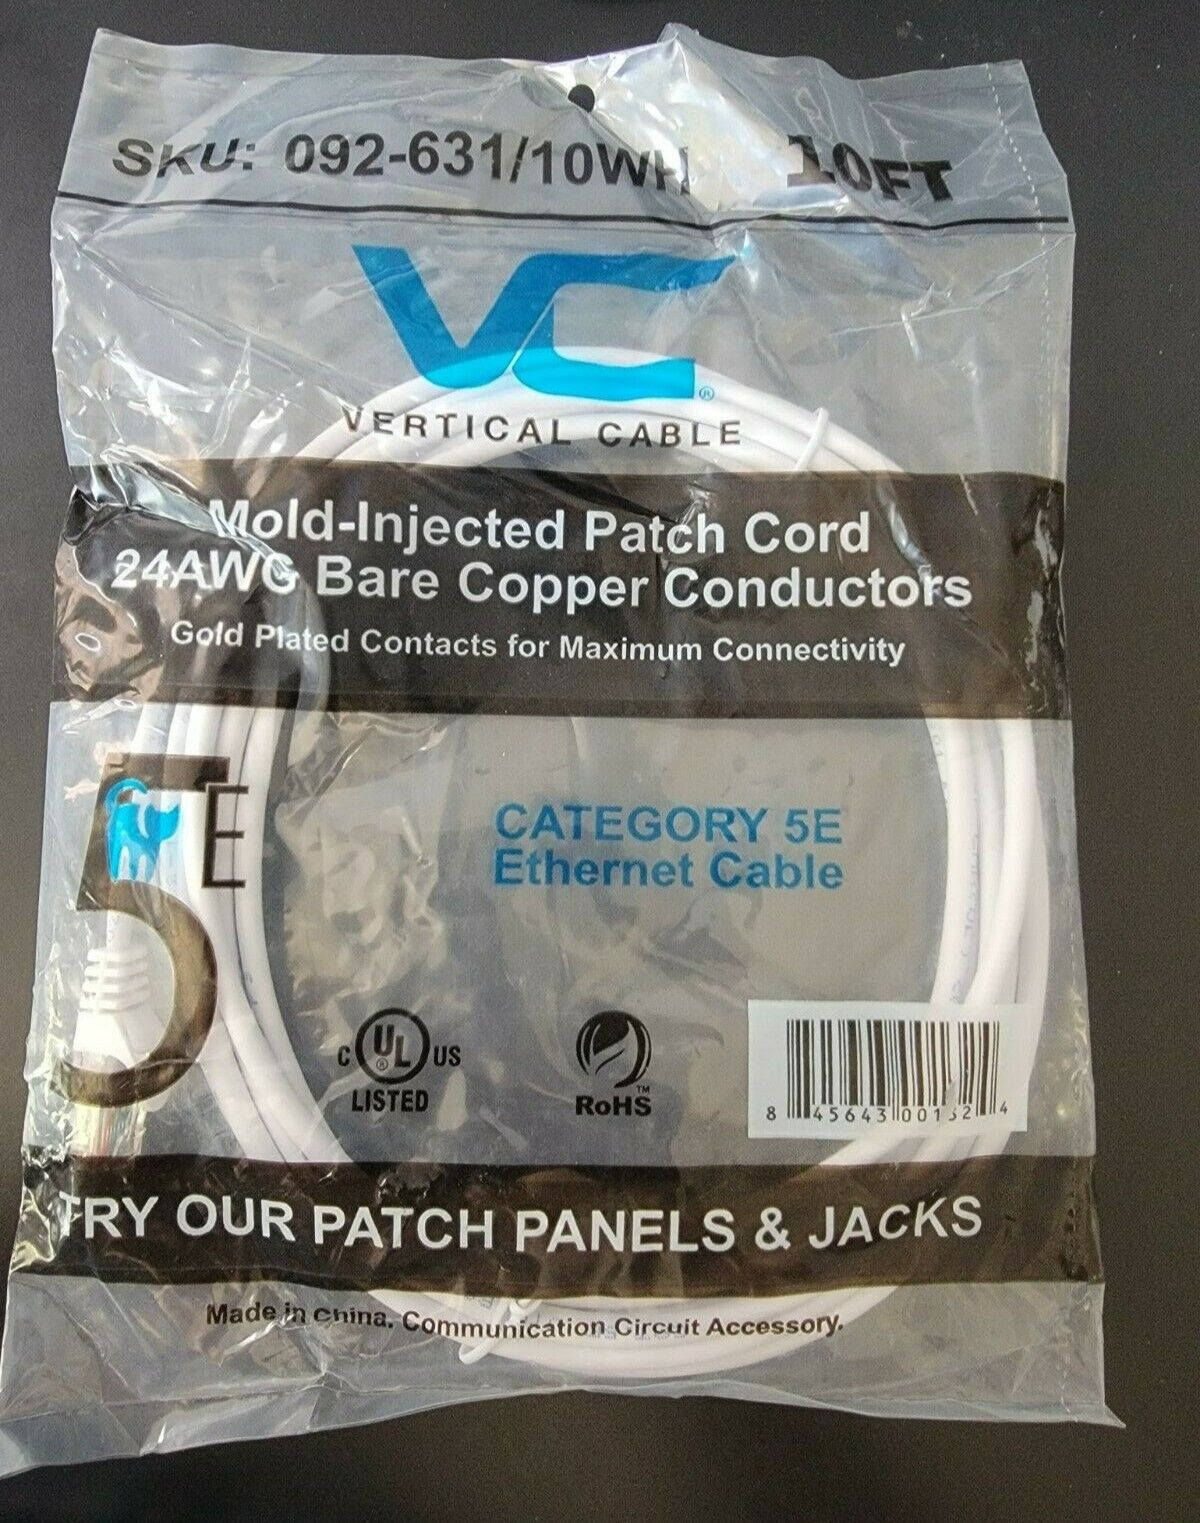 Vertical Cable 24AWG Bare Copper Conductors Ethernet Cable Cat 5E 10' Patch Cord